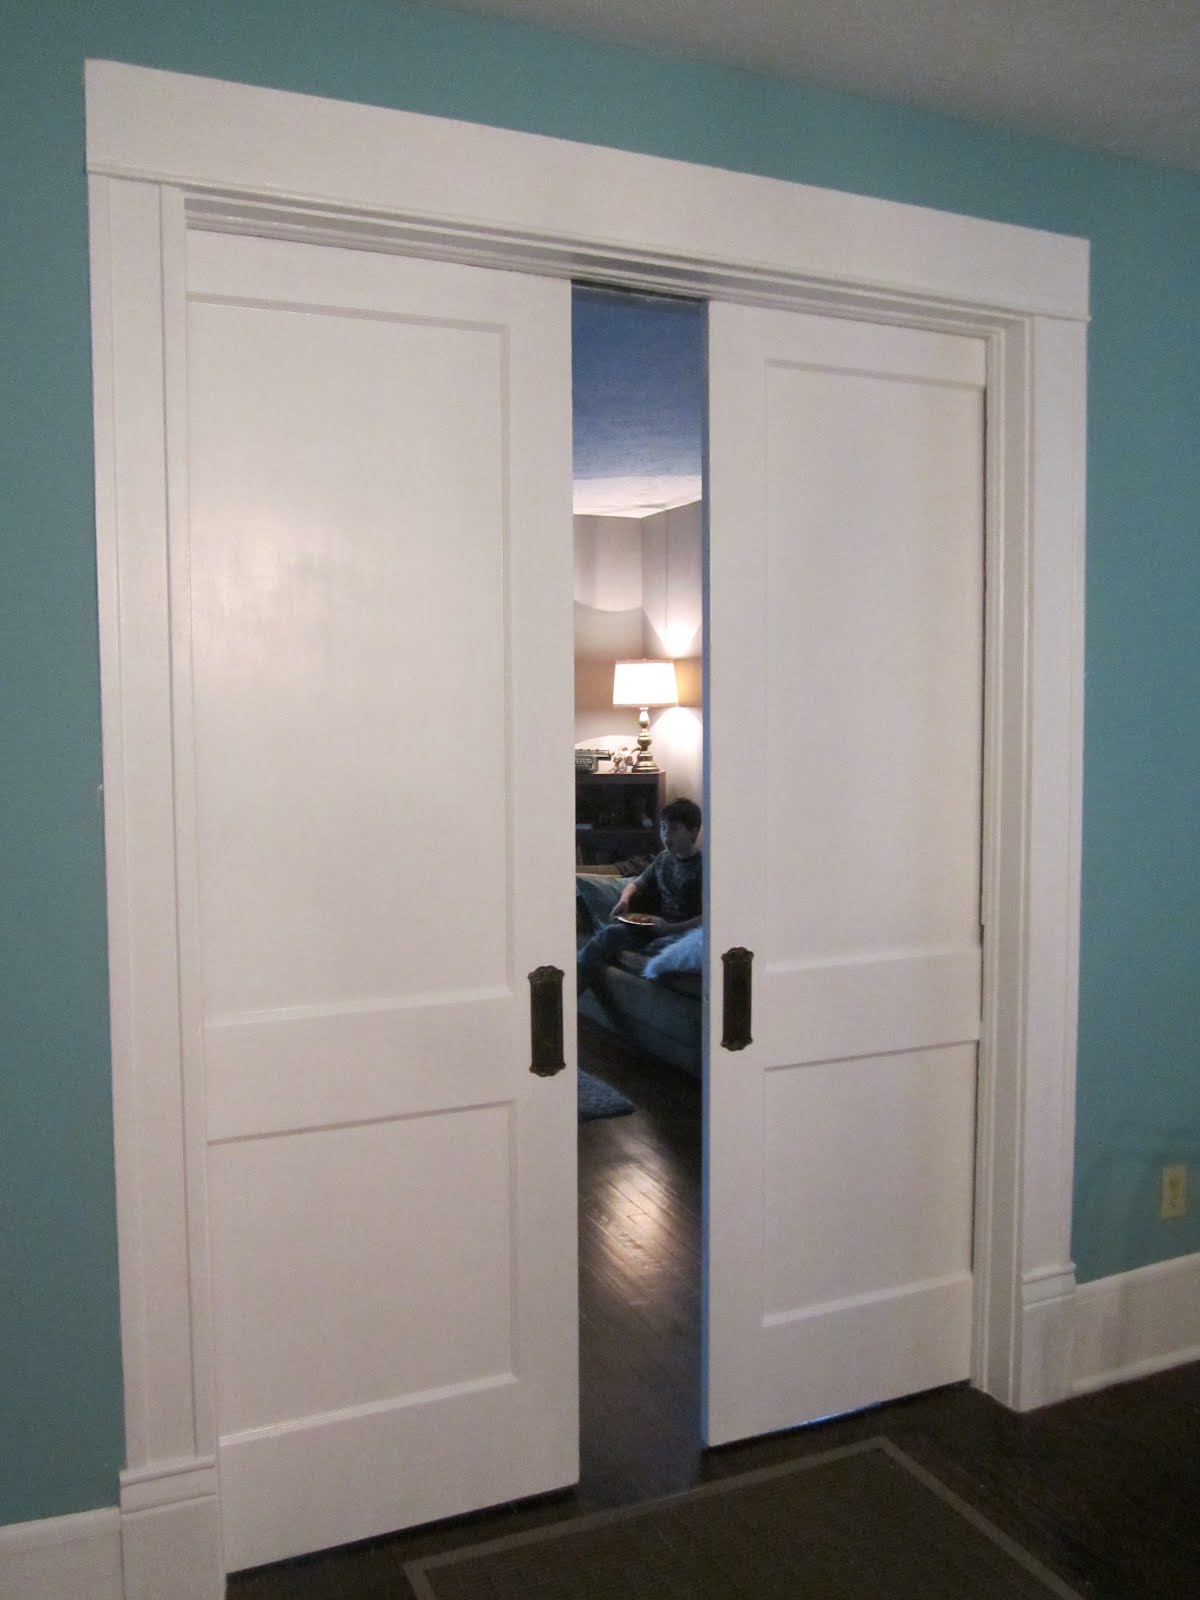 Little Old House: Pi-pa-pocket doors: The reveal